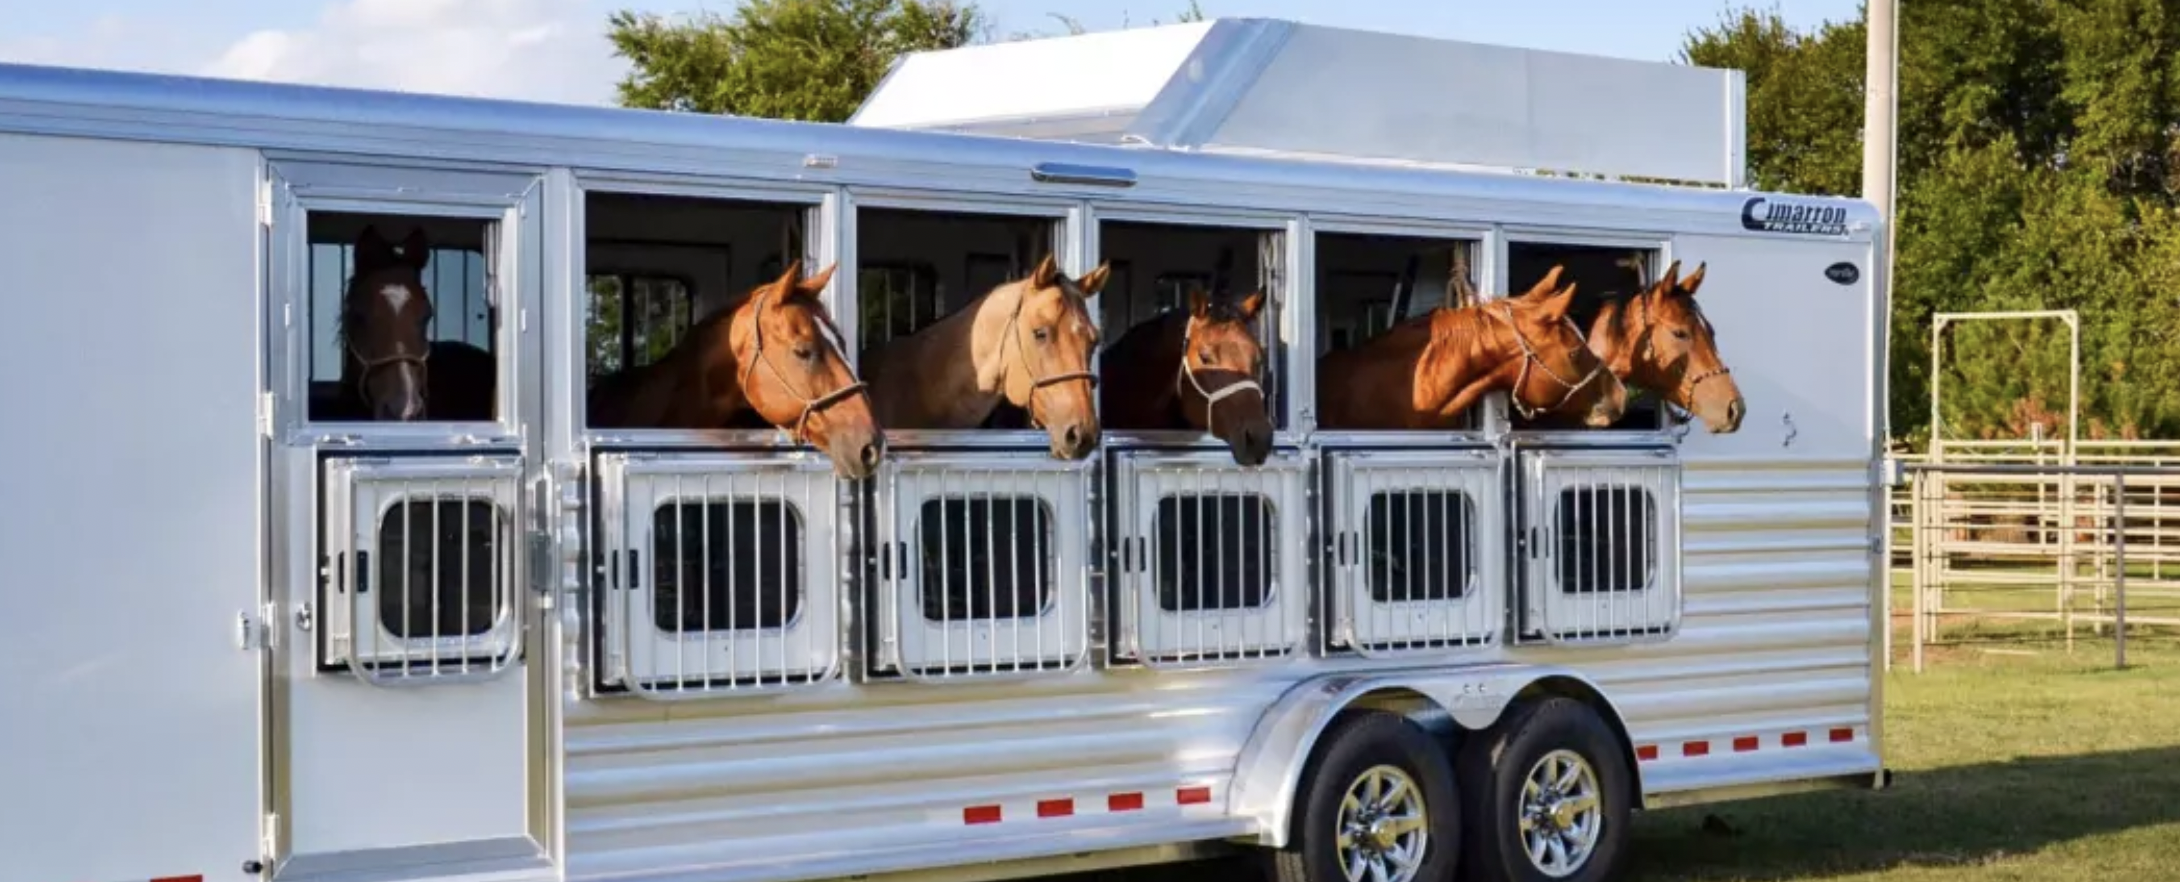 Horse Trailer Insurance: Do You Really Need It?